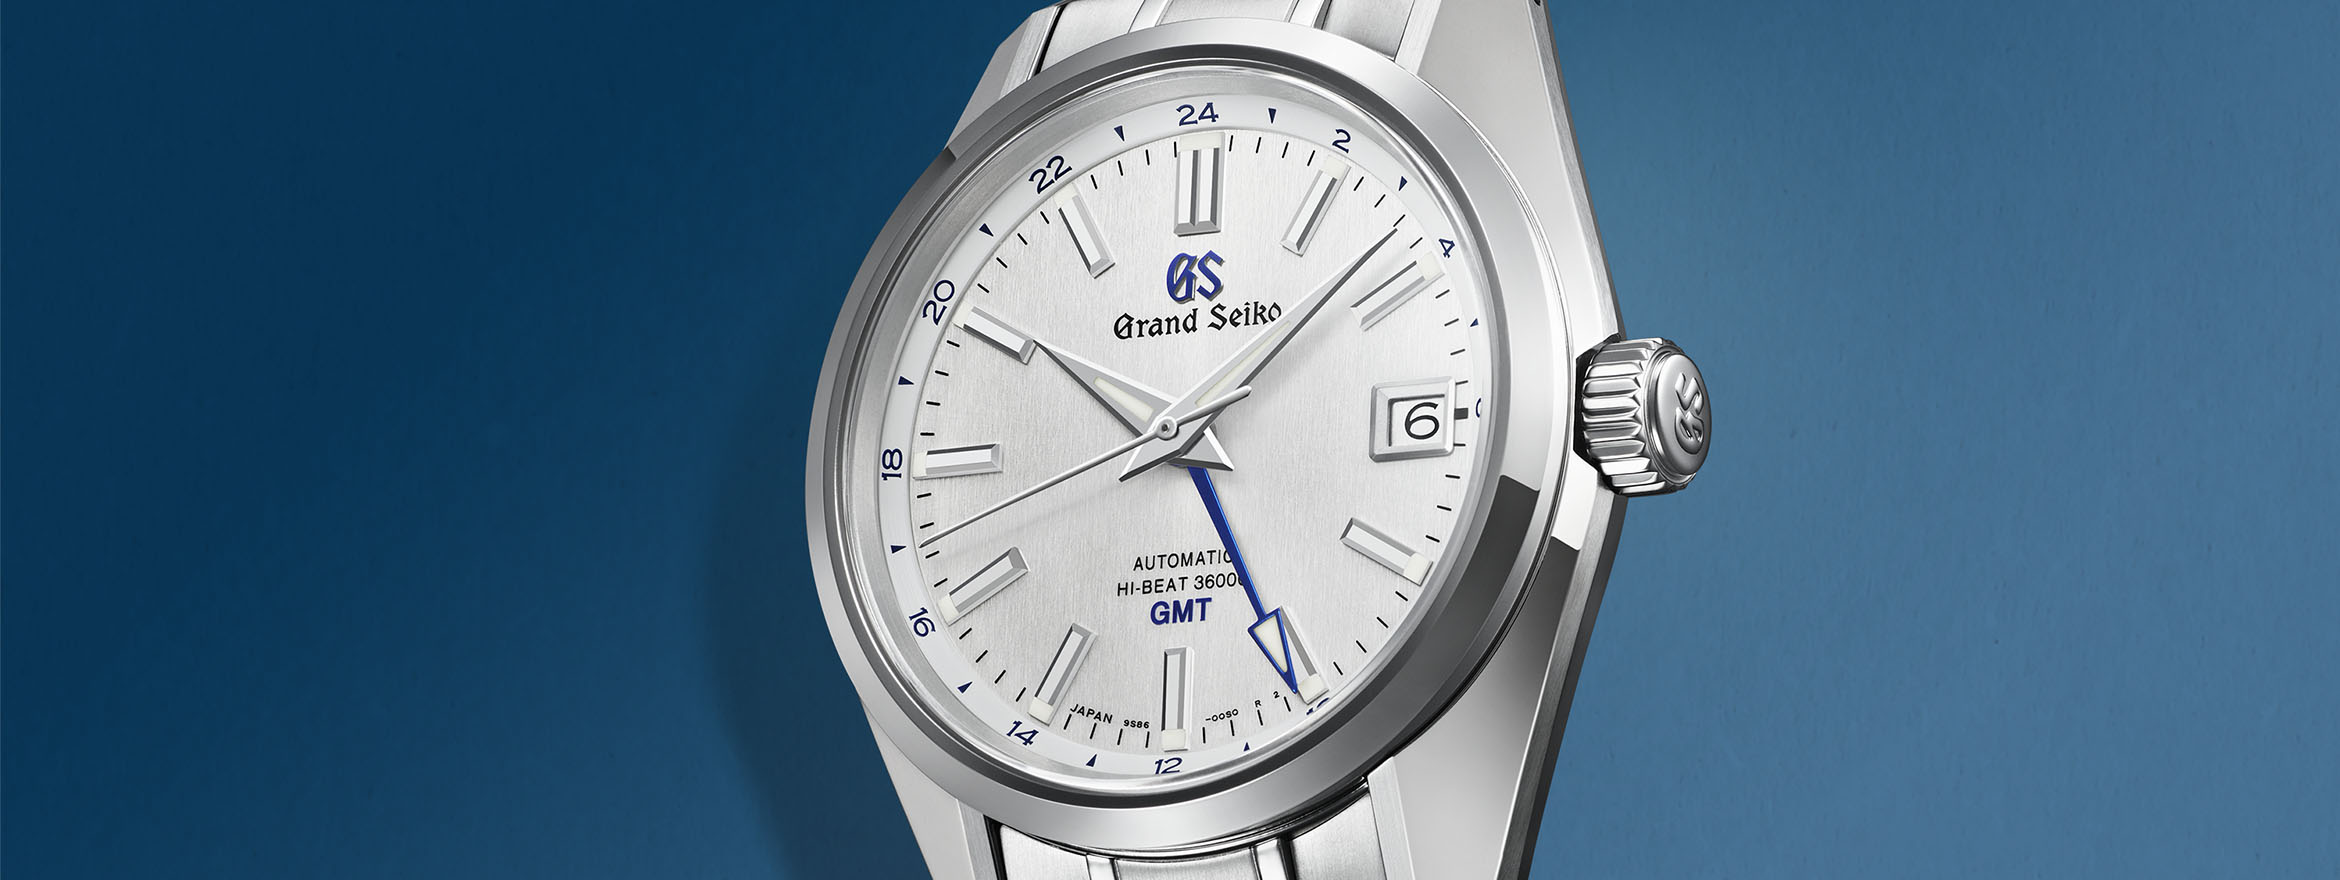 Discover the new Grand Seiko Hi-Beat 36000 GMT watch at Watches of  Switzerland NEX - The Hour Glass Malaysia